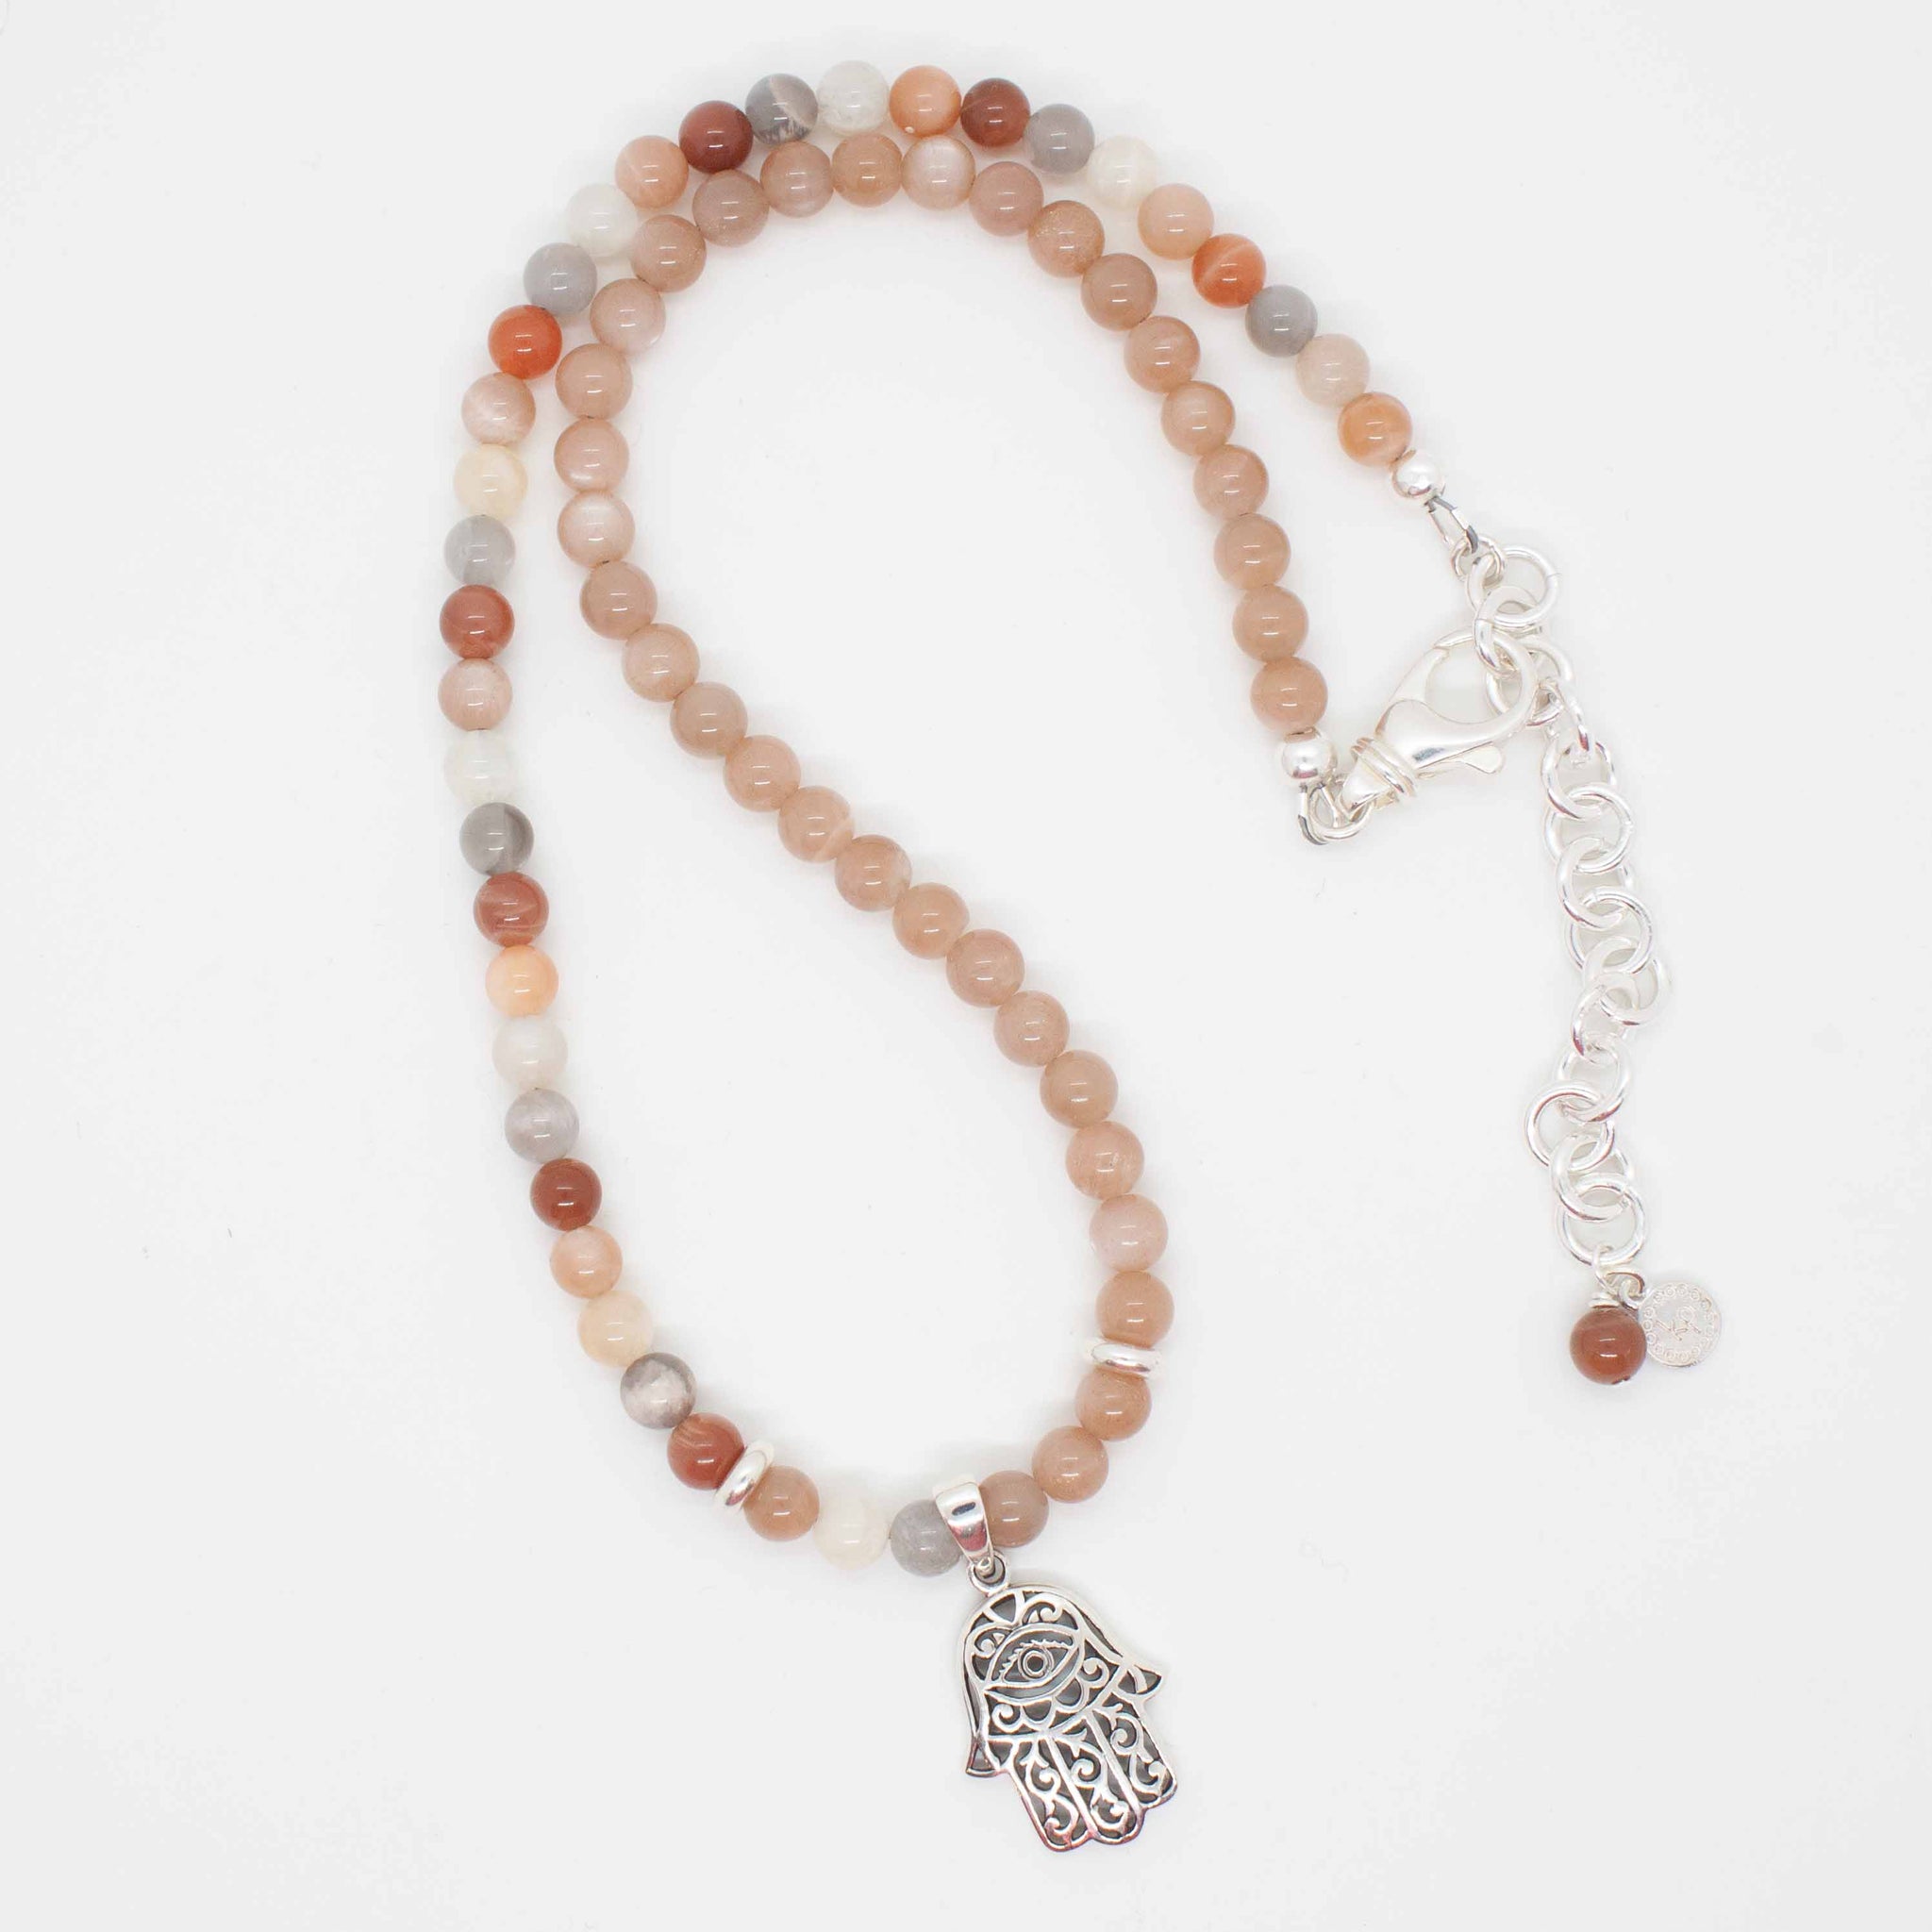 18 inch (adjustable to 20 inches) peach & mixed moonstone necklace with sterling silver hamsa charm